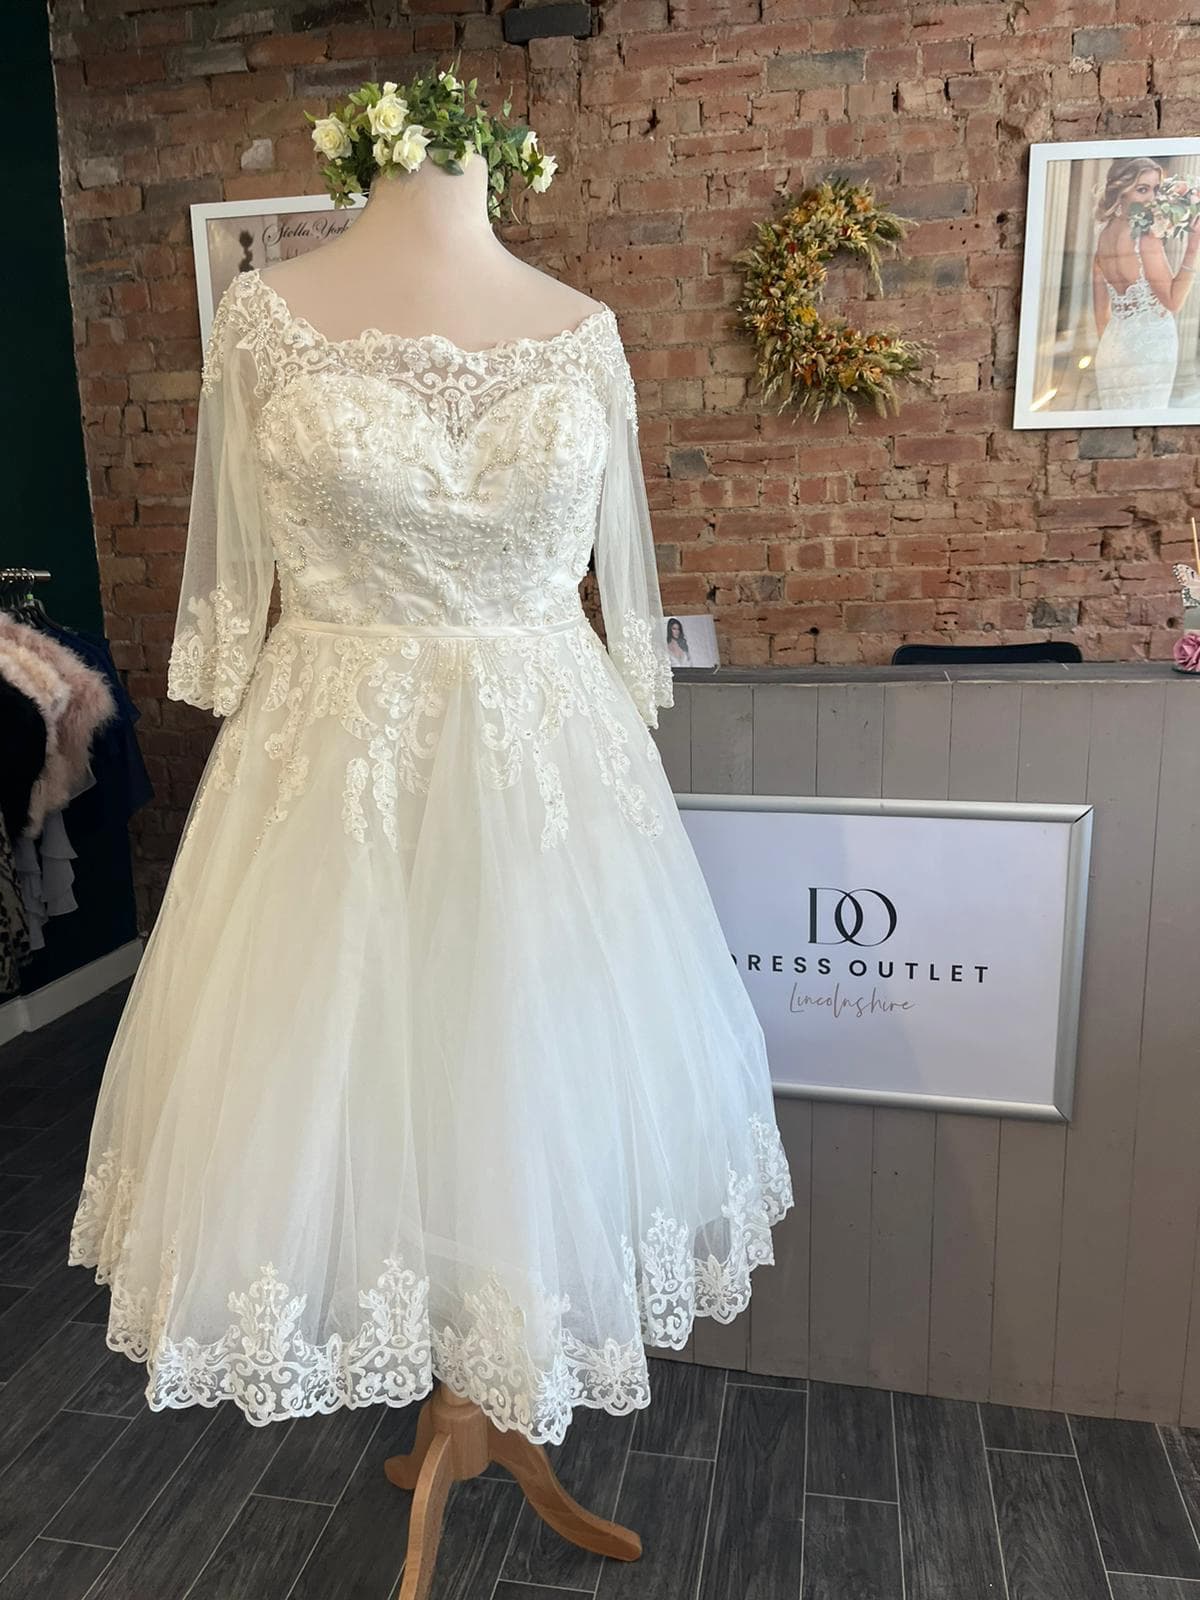 View of Valentina Bridal Gown on a mannequin.